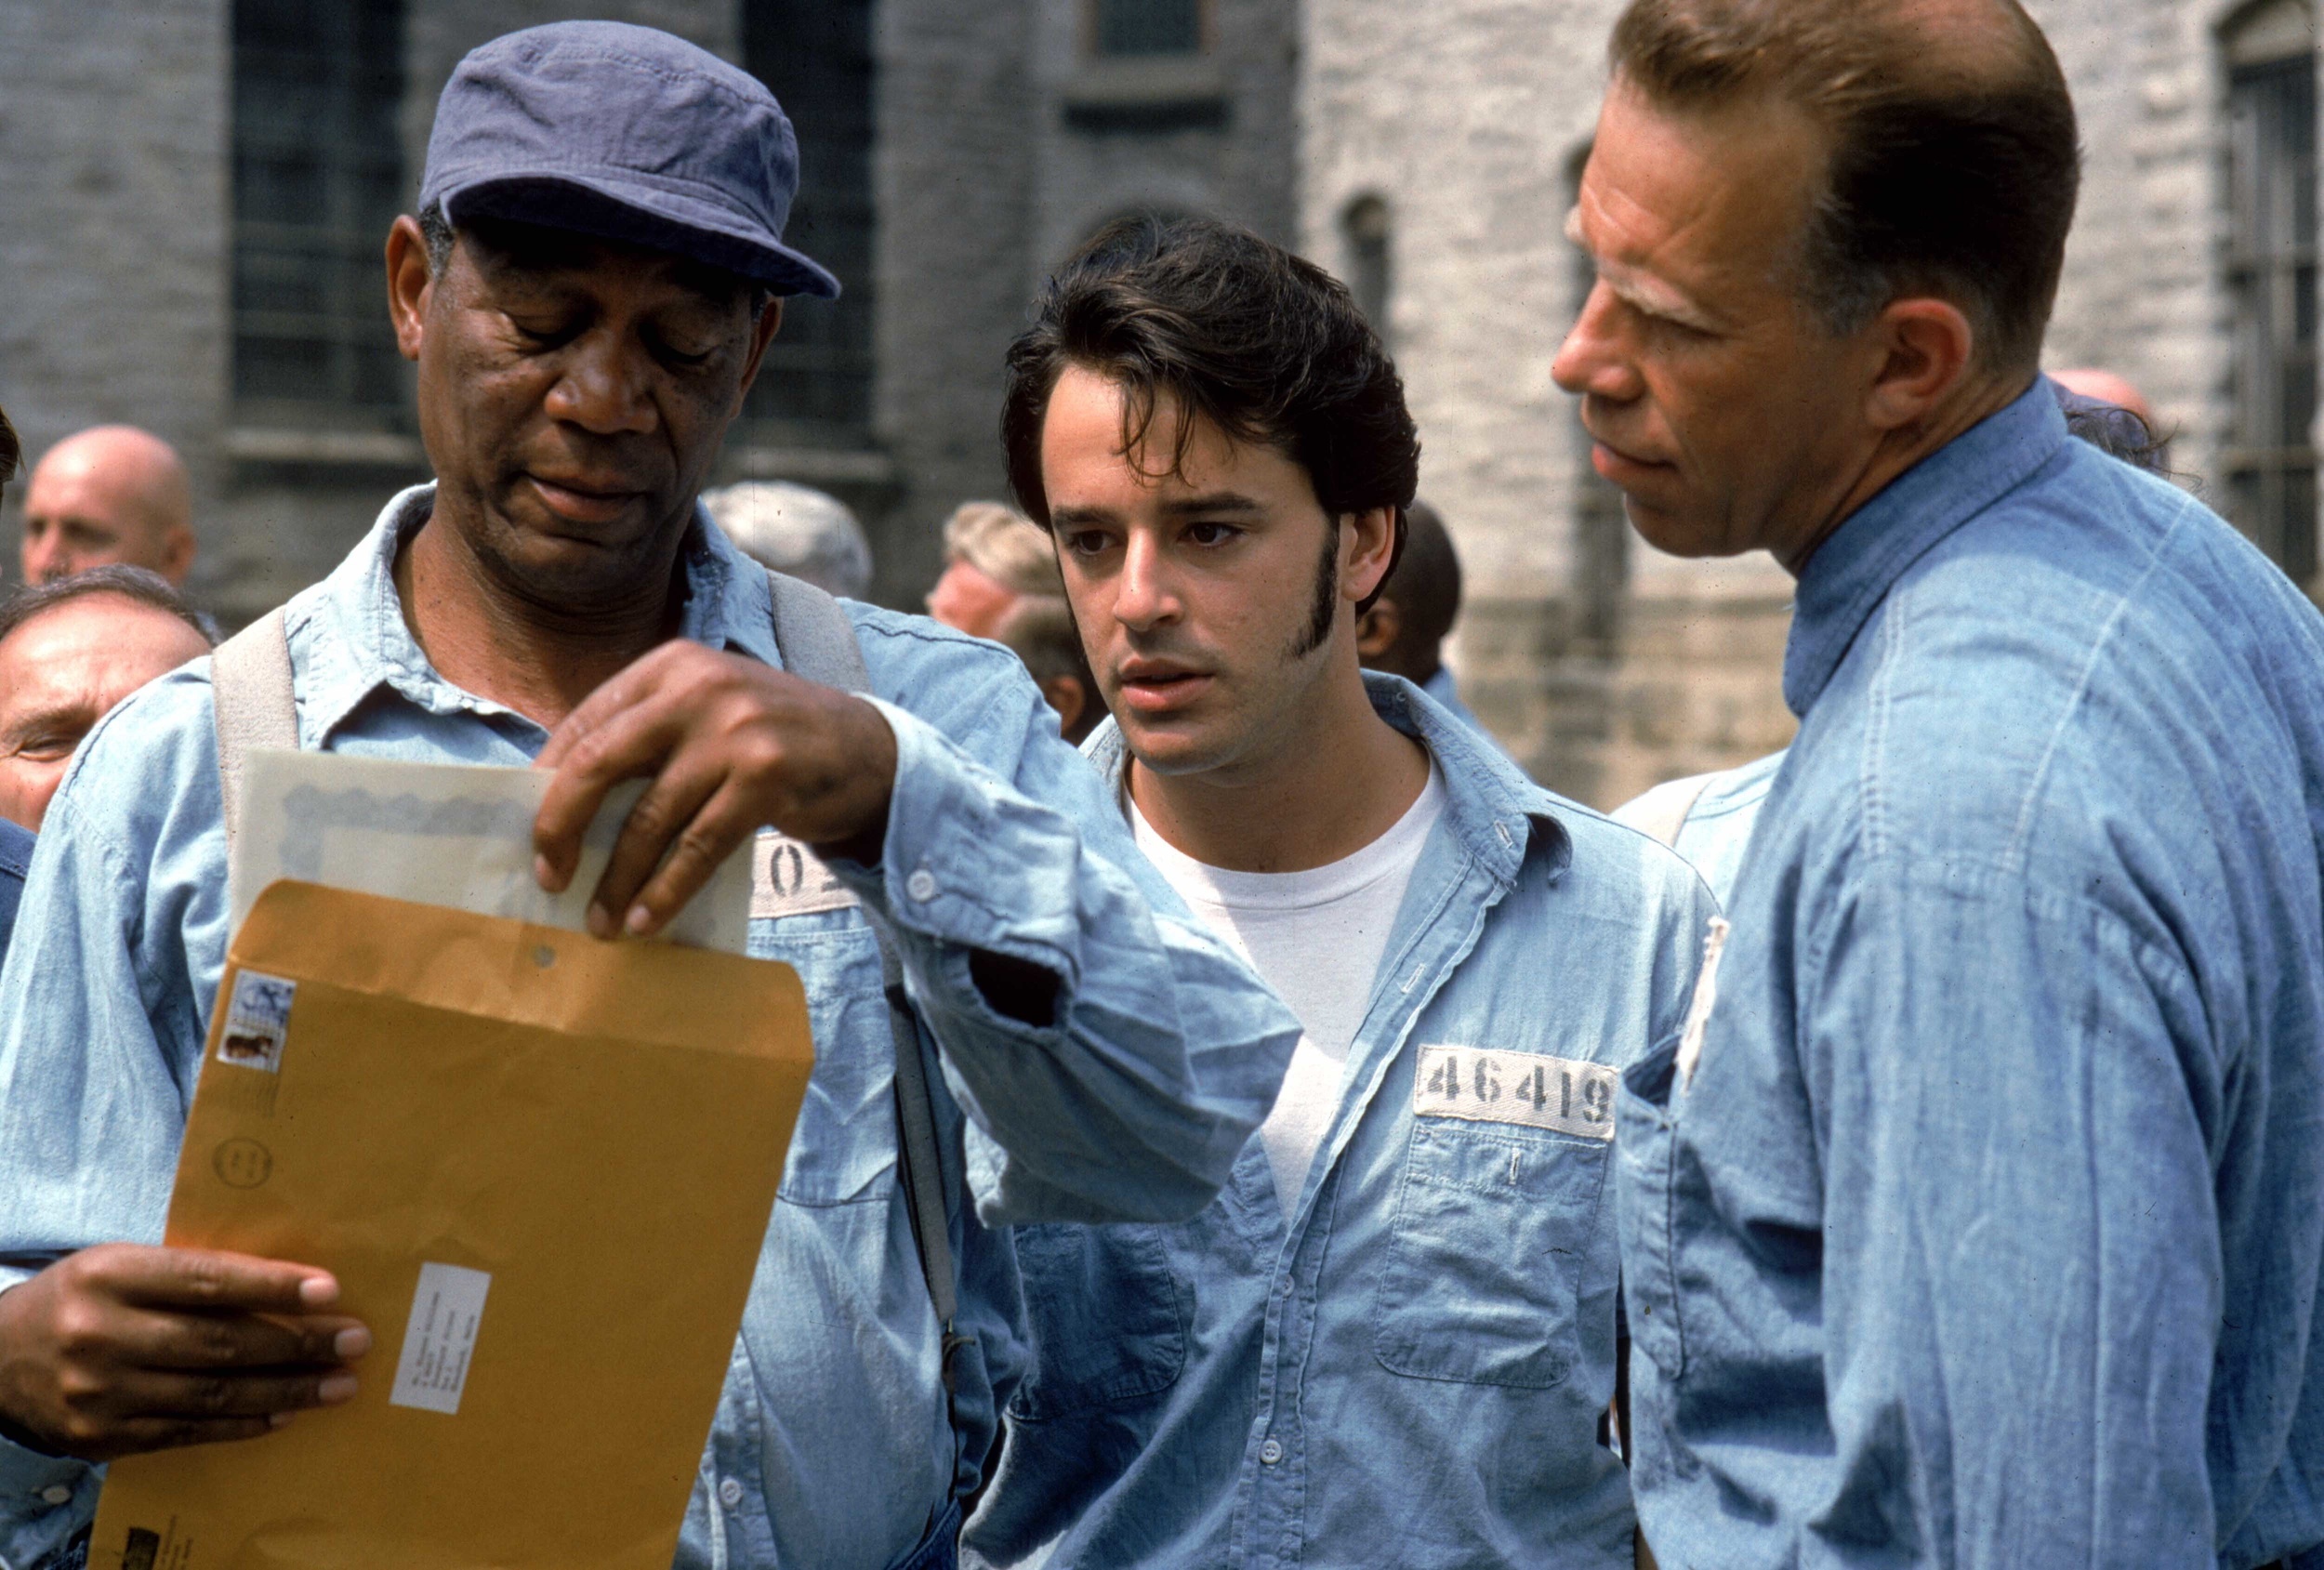 <p>We started with Andy’s most-quoted line, and this is Red’s. This is Red summing up, eloquently, what Andy has done in his escape from prison. It’s a moment of triumph not just for Andy, but for all the inmates at Shawshank, particularly his friend Red.</p><p>You may also like: <a href='https://www.yardbarker.com/entertainment/articles/15_prince_songs_made_famous_by_other_artists_101023/s1__23741893'>15 Prince songs made famous by other artists</a></p>